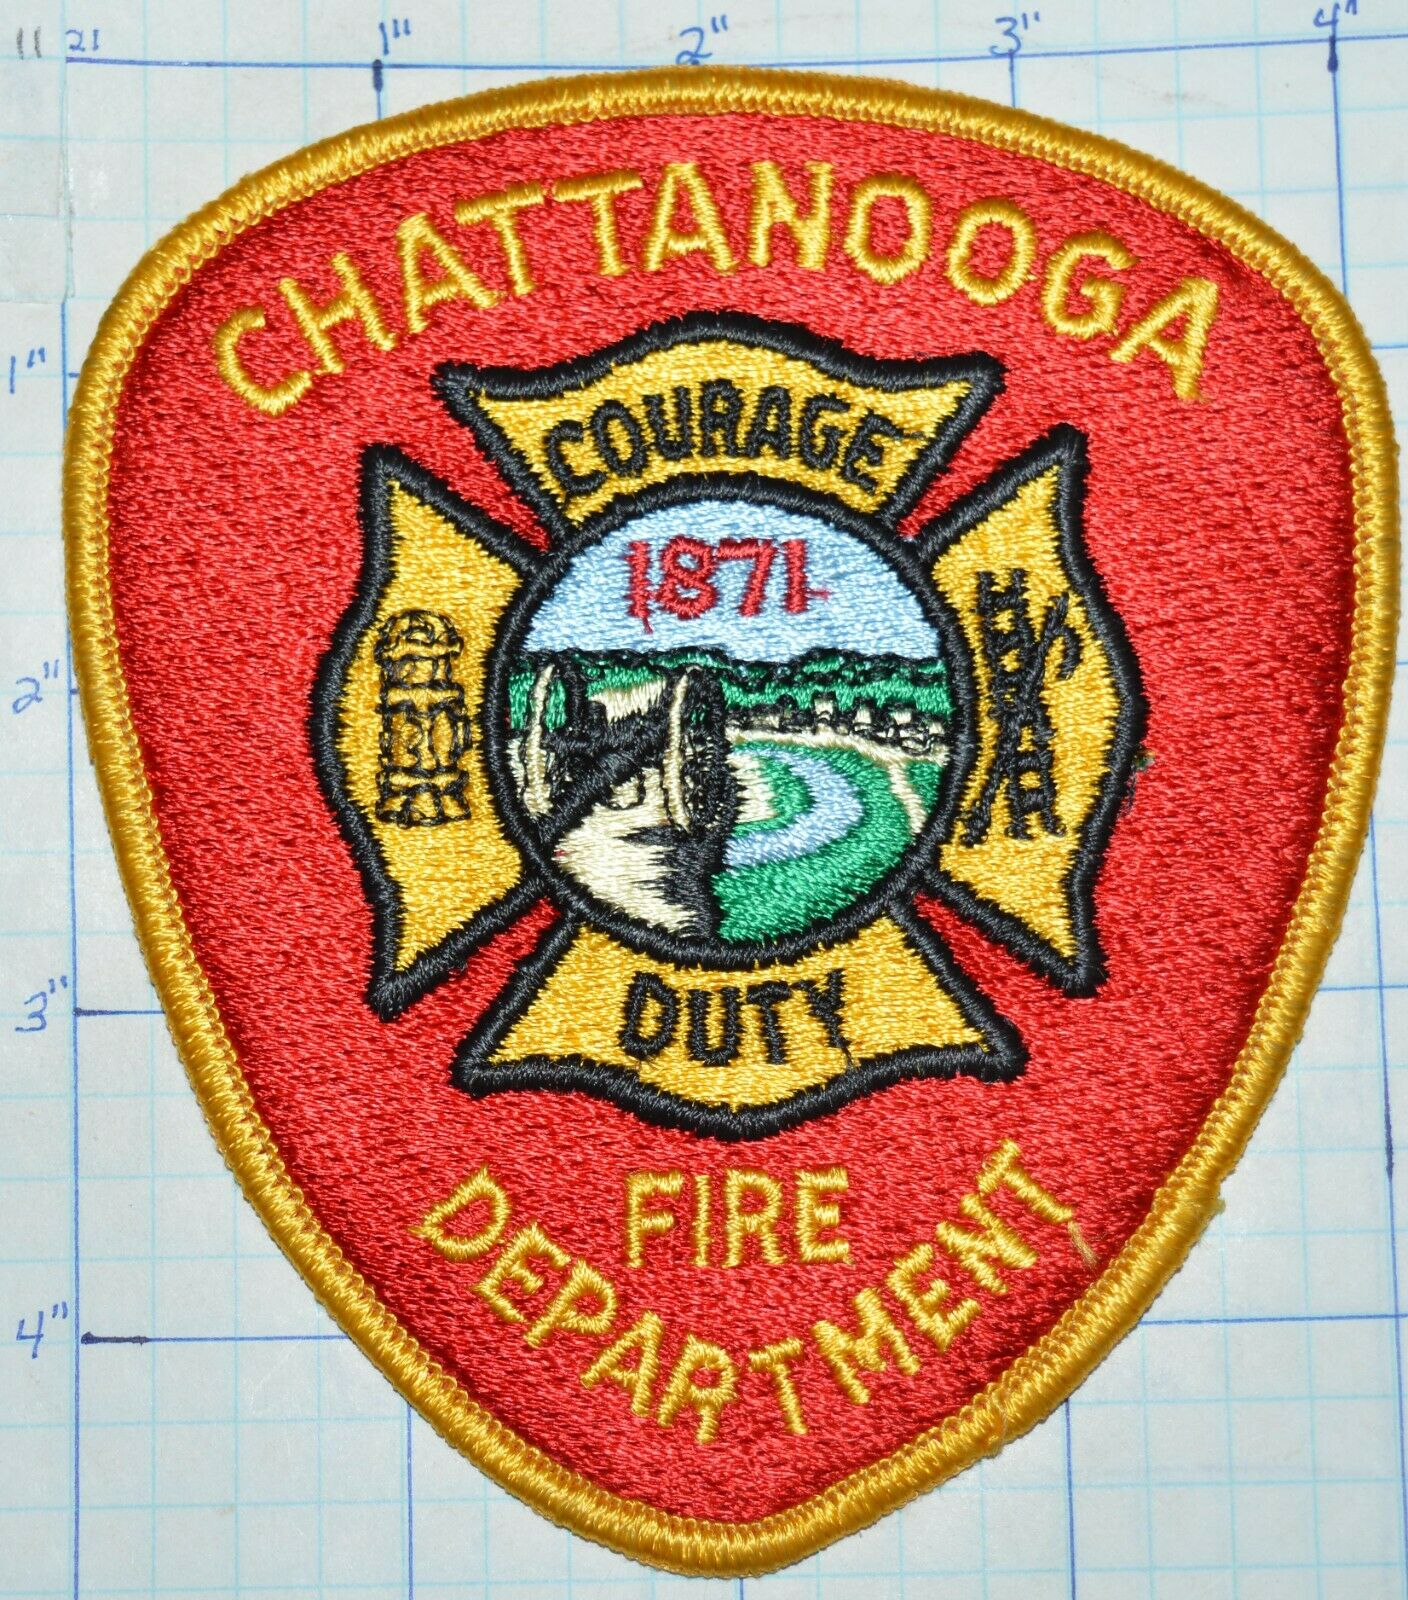 TENNESSEE, CHATTANOOGA FIRE DEPT RED PATCH